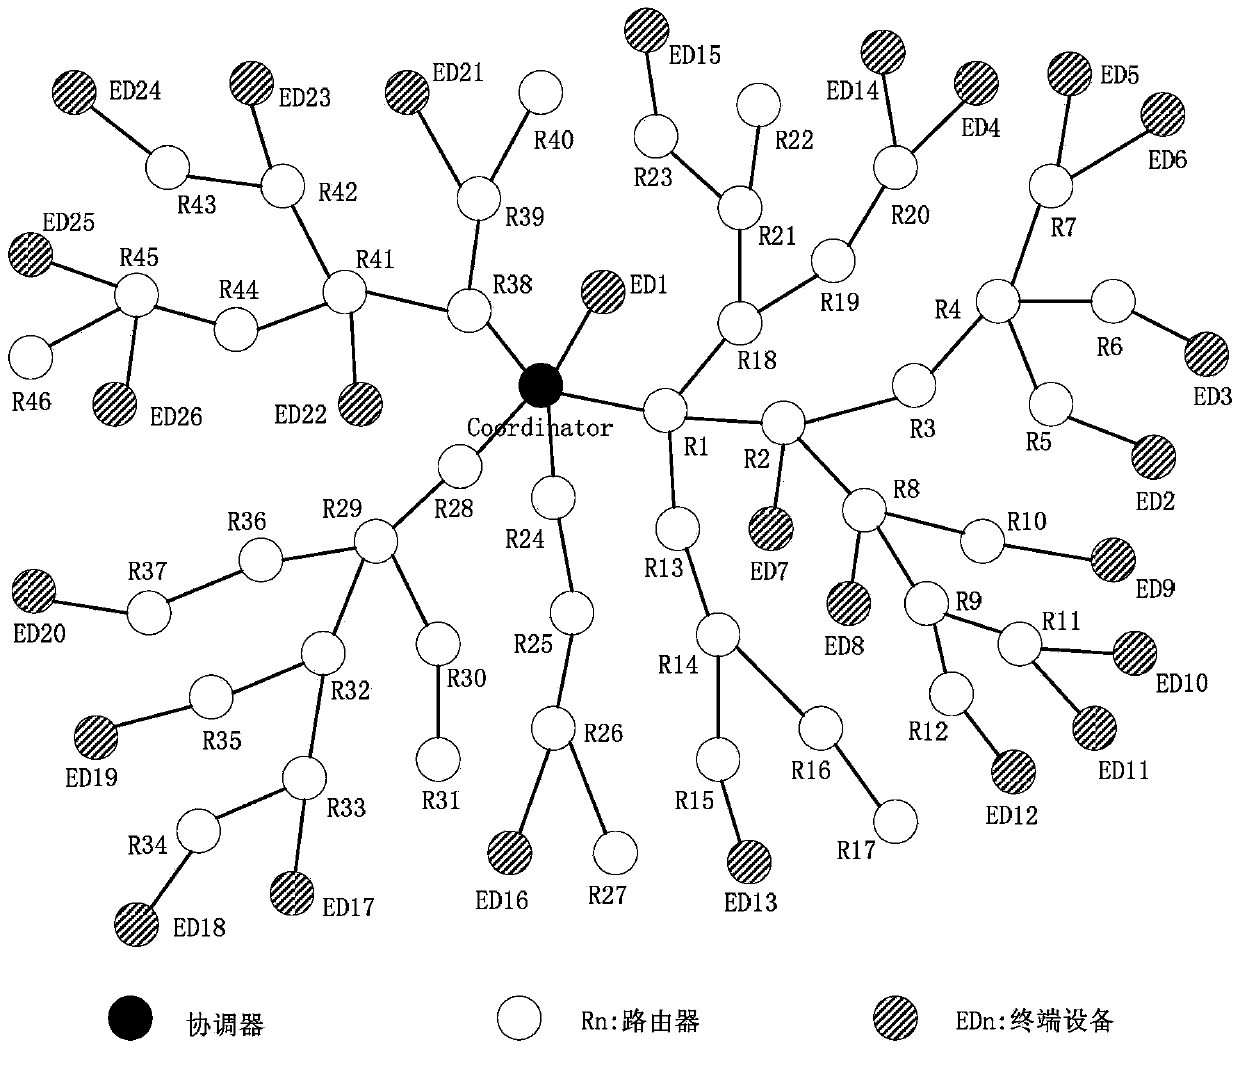 Zigbee network tree-shaped routing method for neighbor table mode interaction